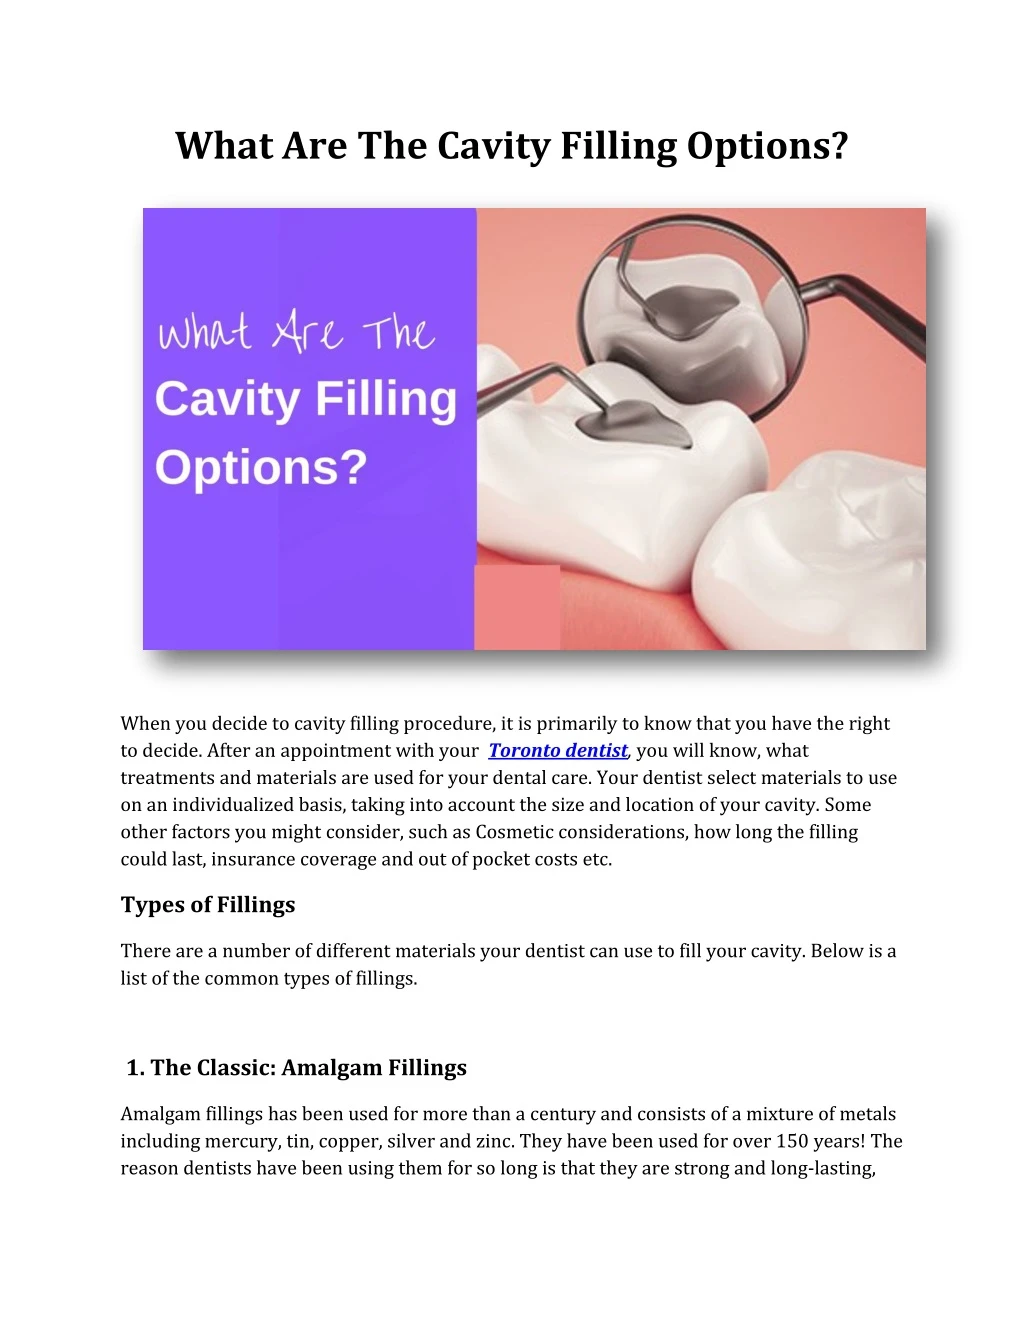 what are the cavity filling options